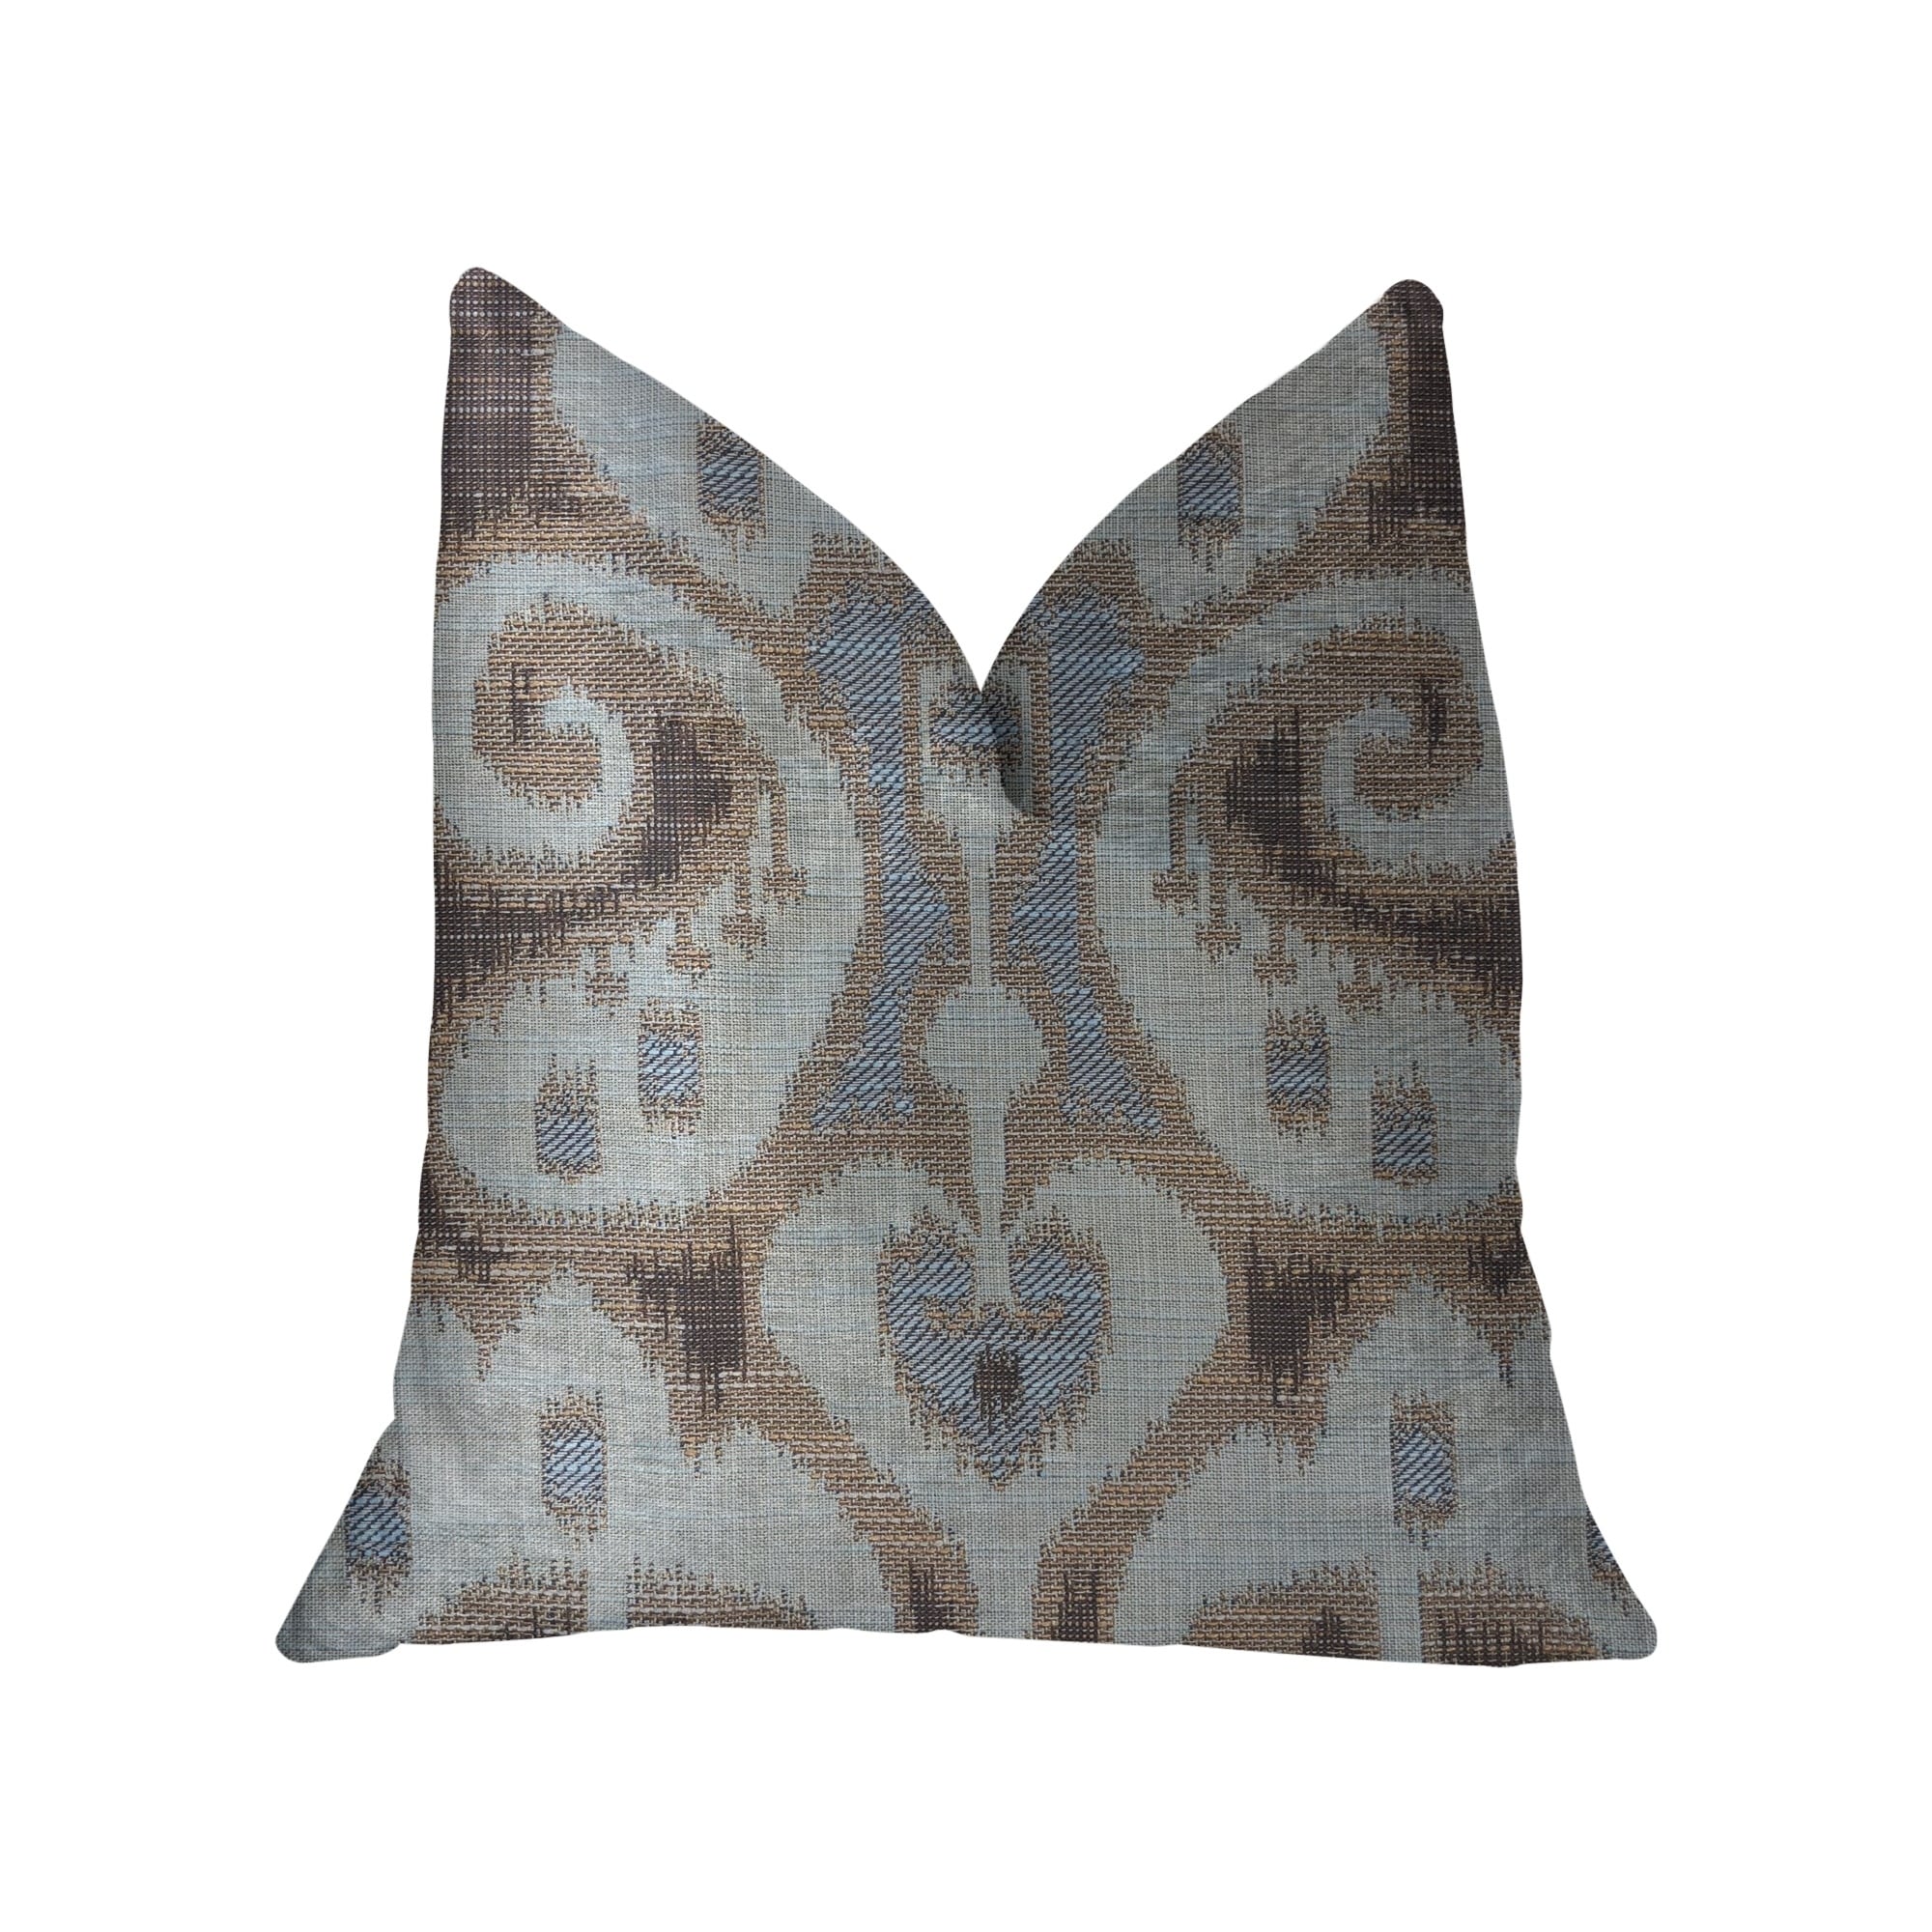 Double Sided 22 x 22 Plutus Brands Blue Plutus Hidden Park Medallion Luxury Throw Pillow 22 in x 22in 